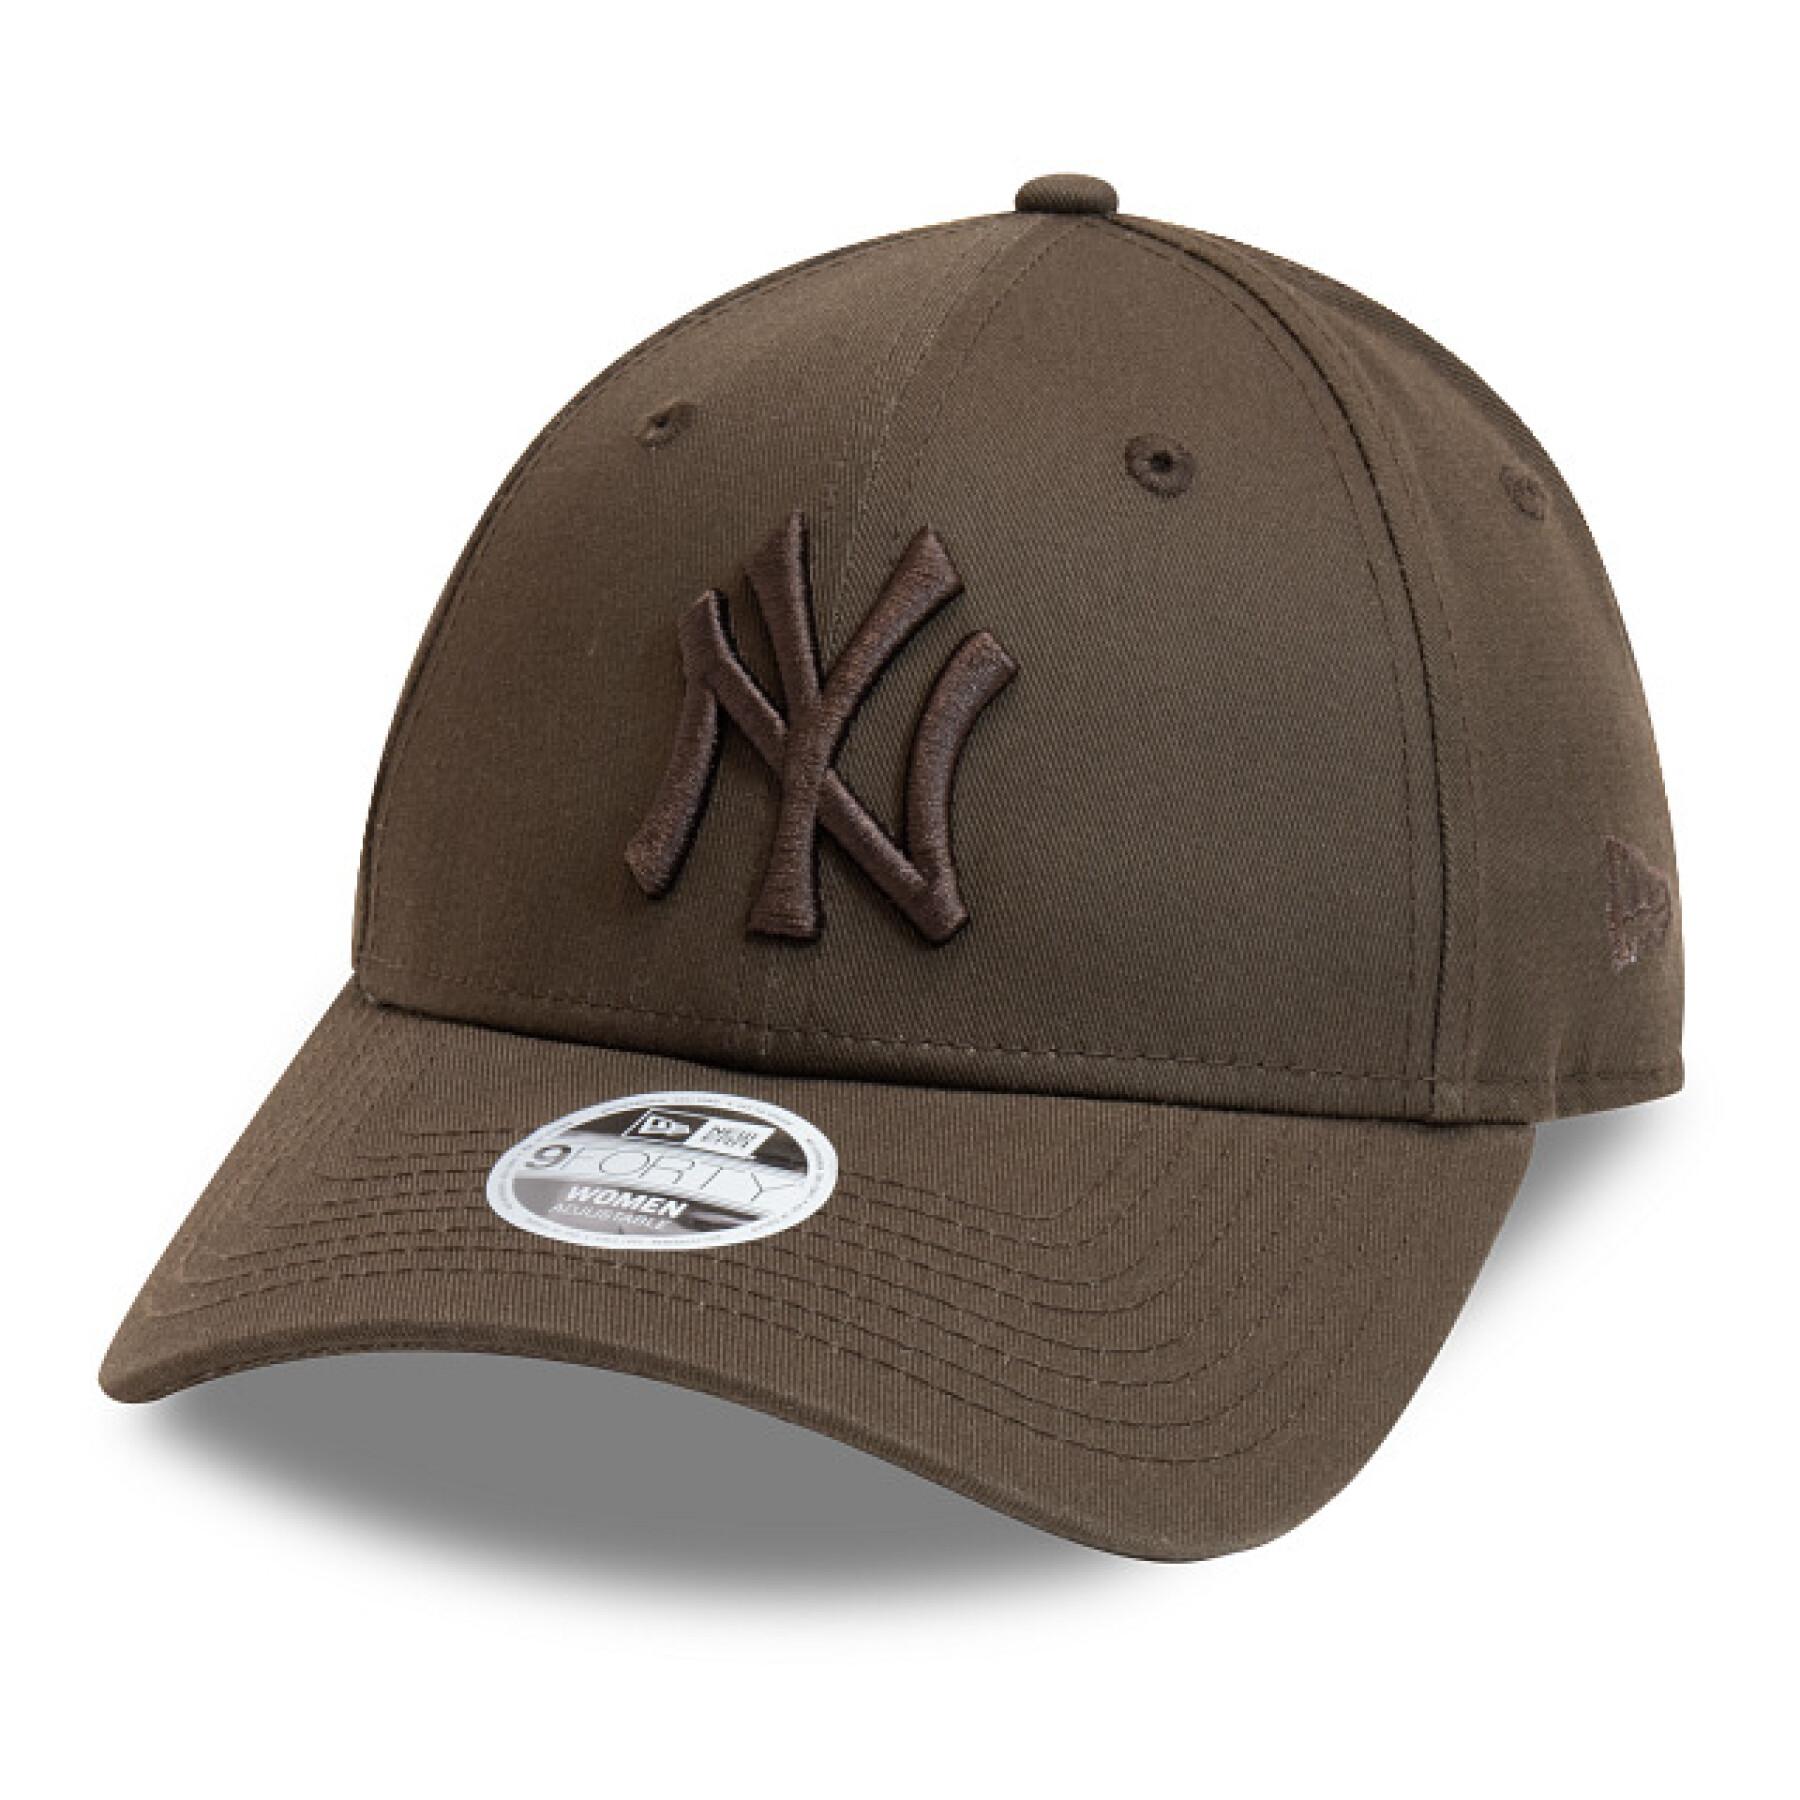 Casquette femme New York Yankees Ess 9FORTY